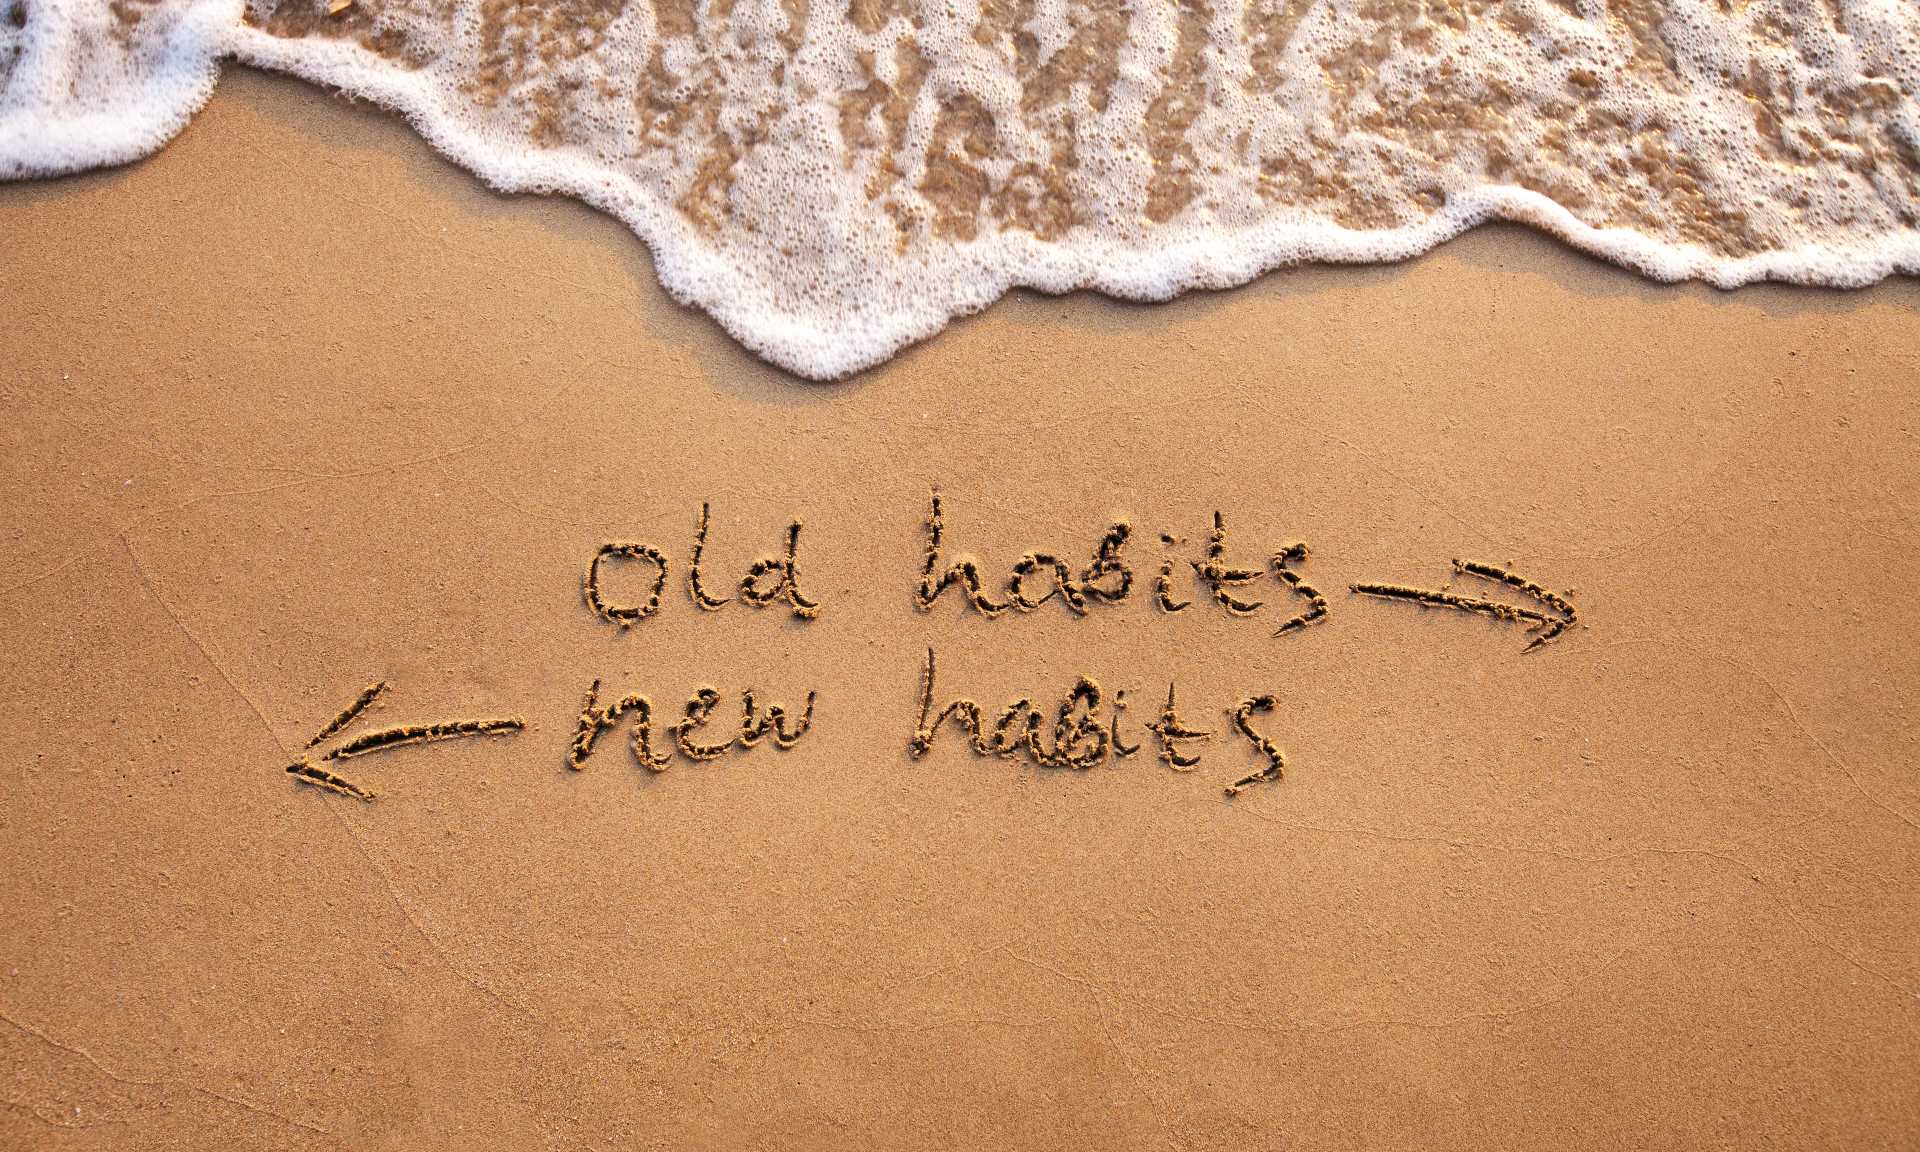 The words old habits and new habits written in beach sand with arrows pointing in either direction and the water approaching